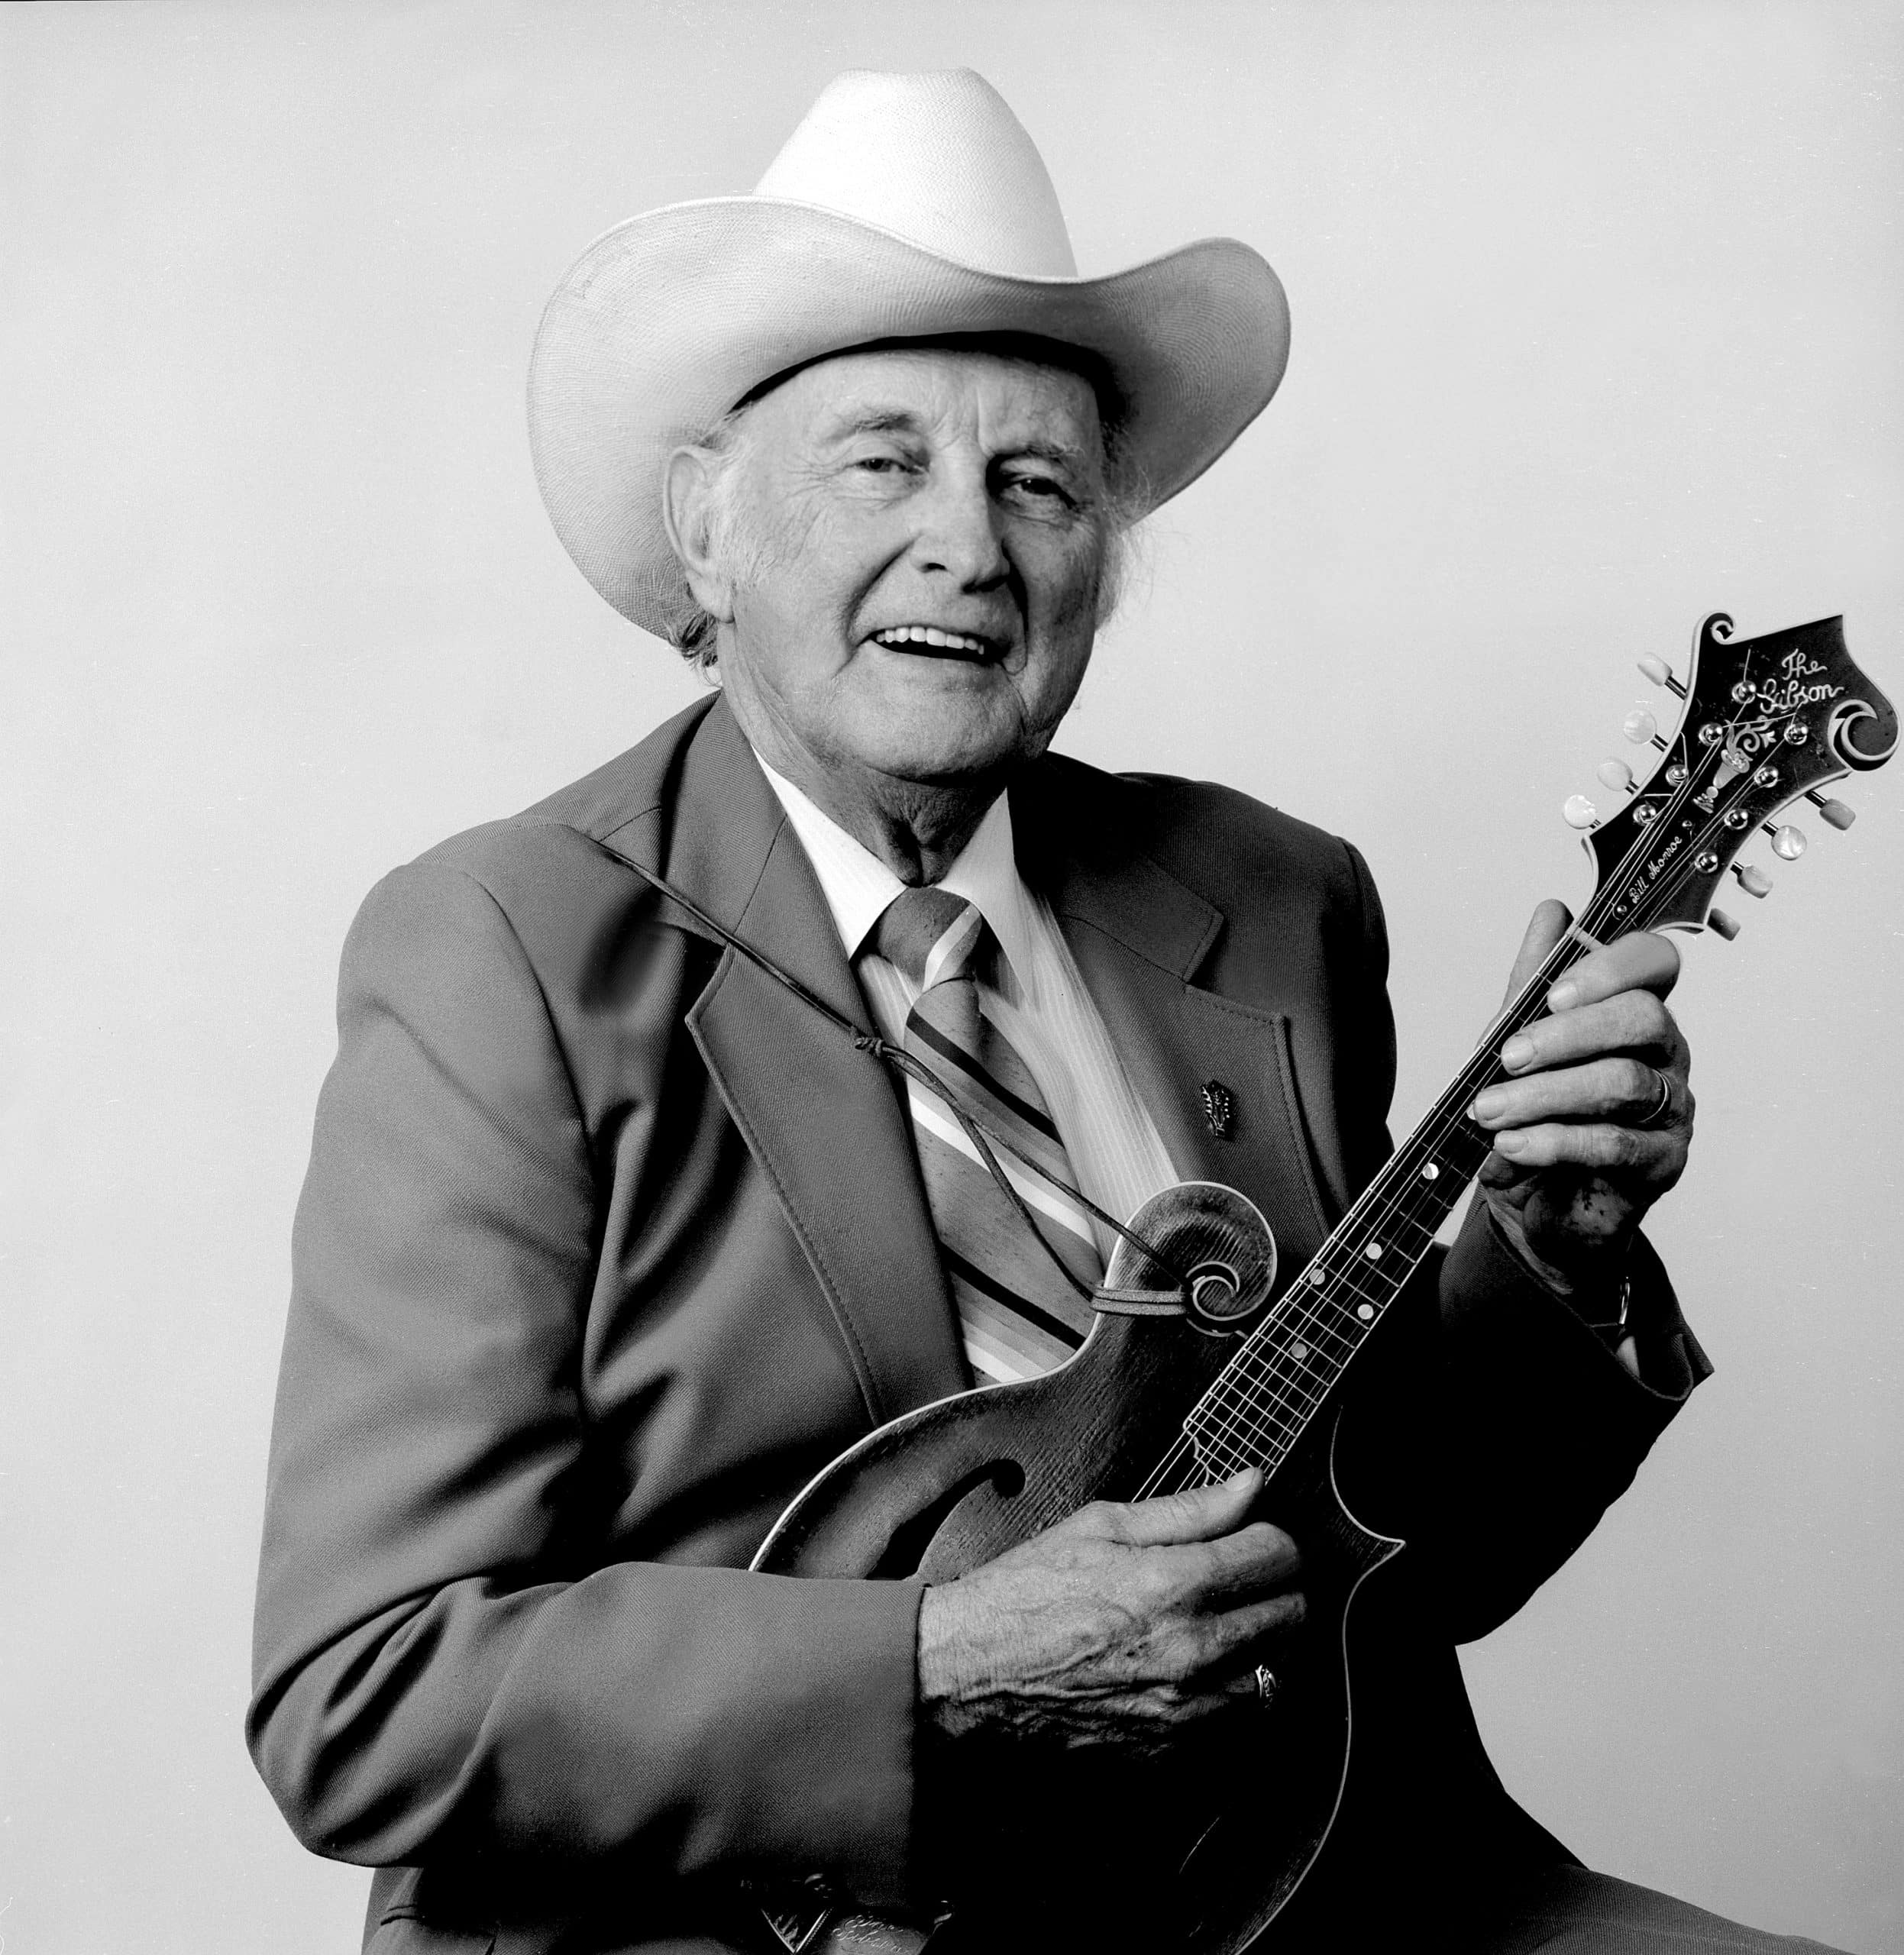 Country Artist Bill Monroe is also in the Rock & Roll Hall of Fame